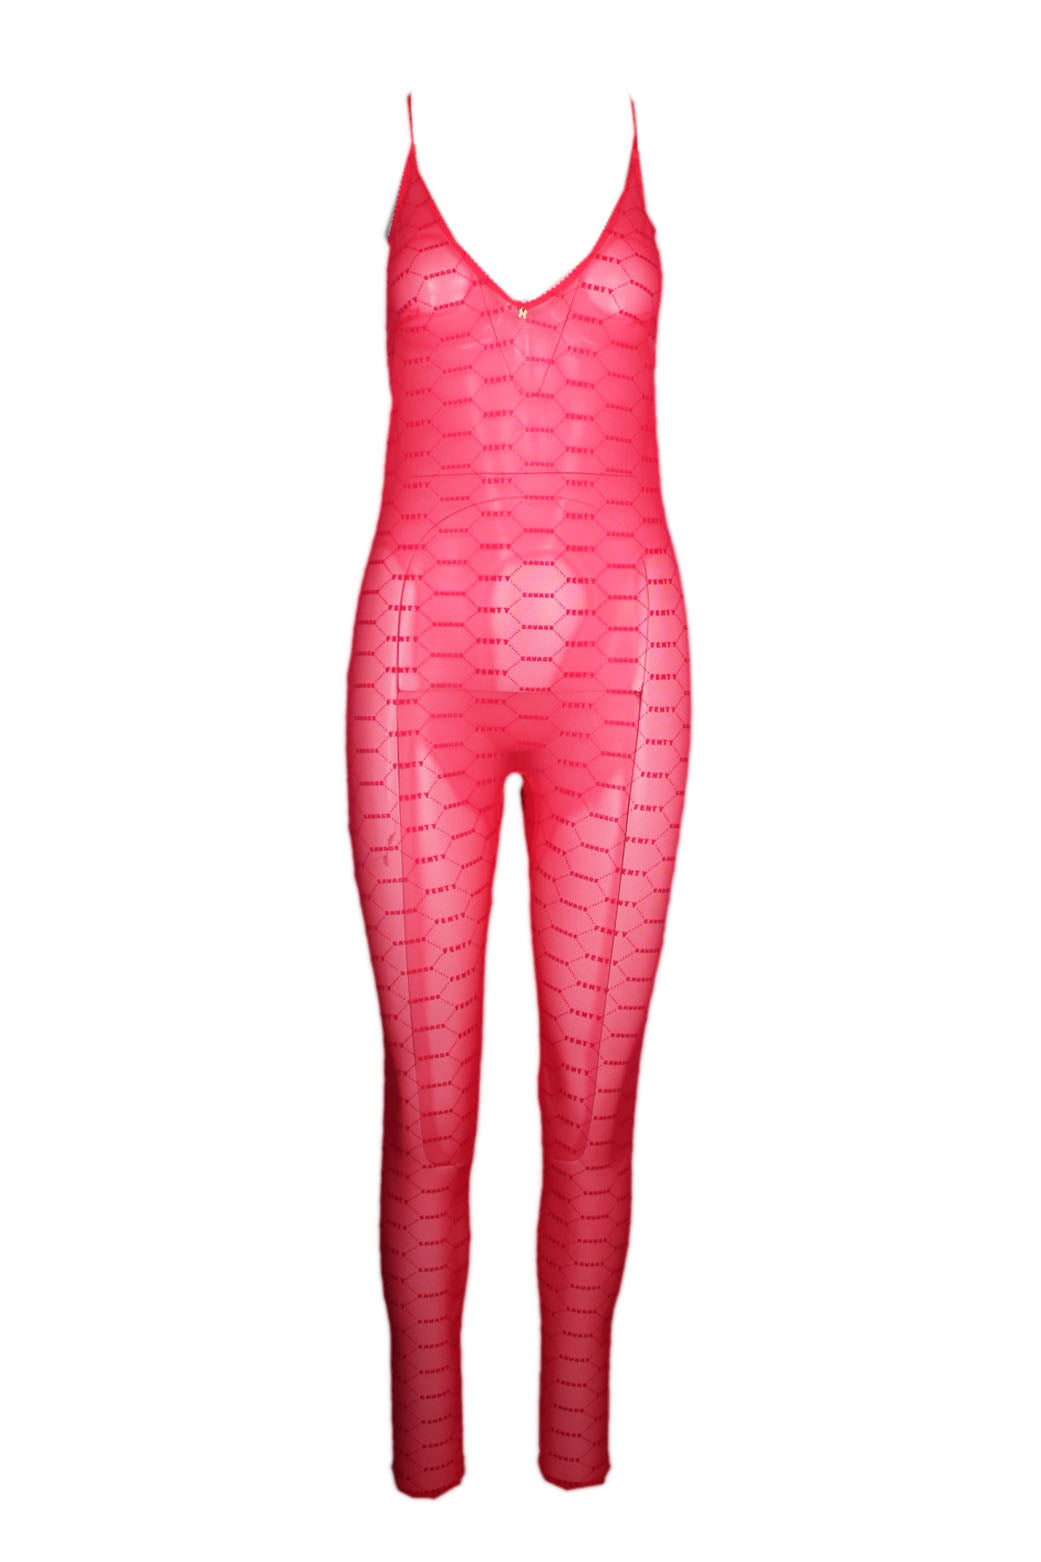 front of savage x fenty red sheer branded crotchless bodysuit. no closure, pull-over style. deep v neckline. adjustable straps. low cut back. fitted skinny silhouette. sheer stretch material branded "savage fenty". open slit at crotch. 